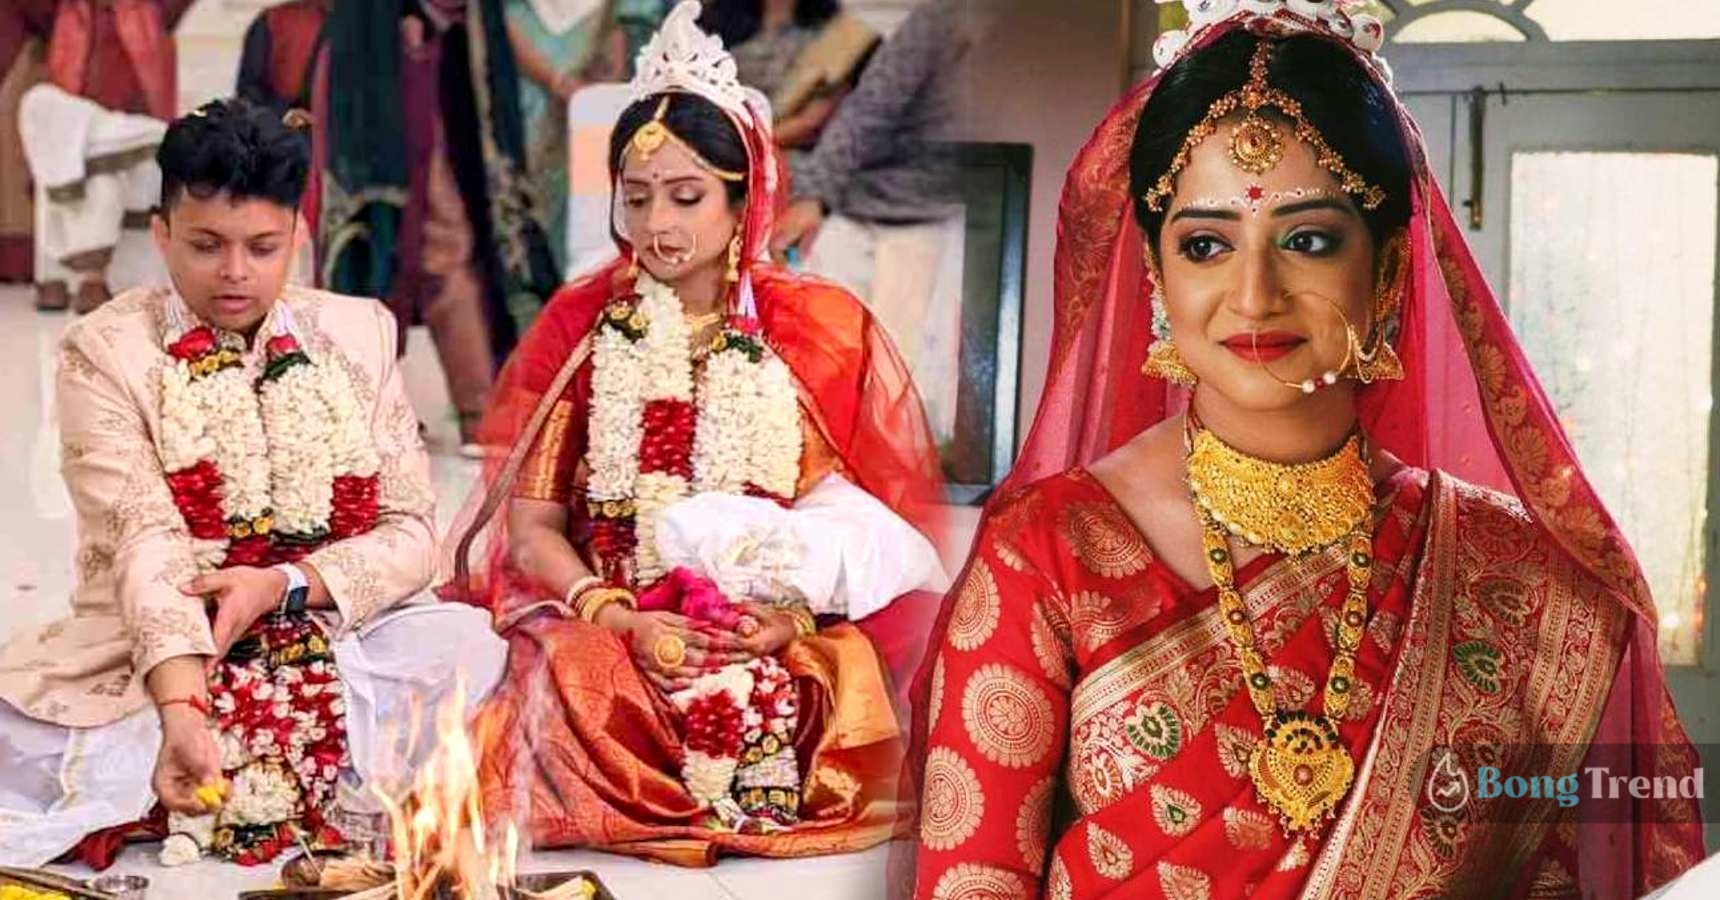 Roosha Chatterjee trolled after Marriage Photo goes viral on internet